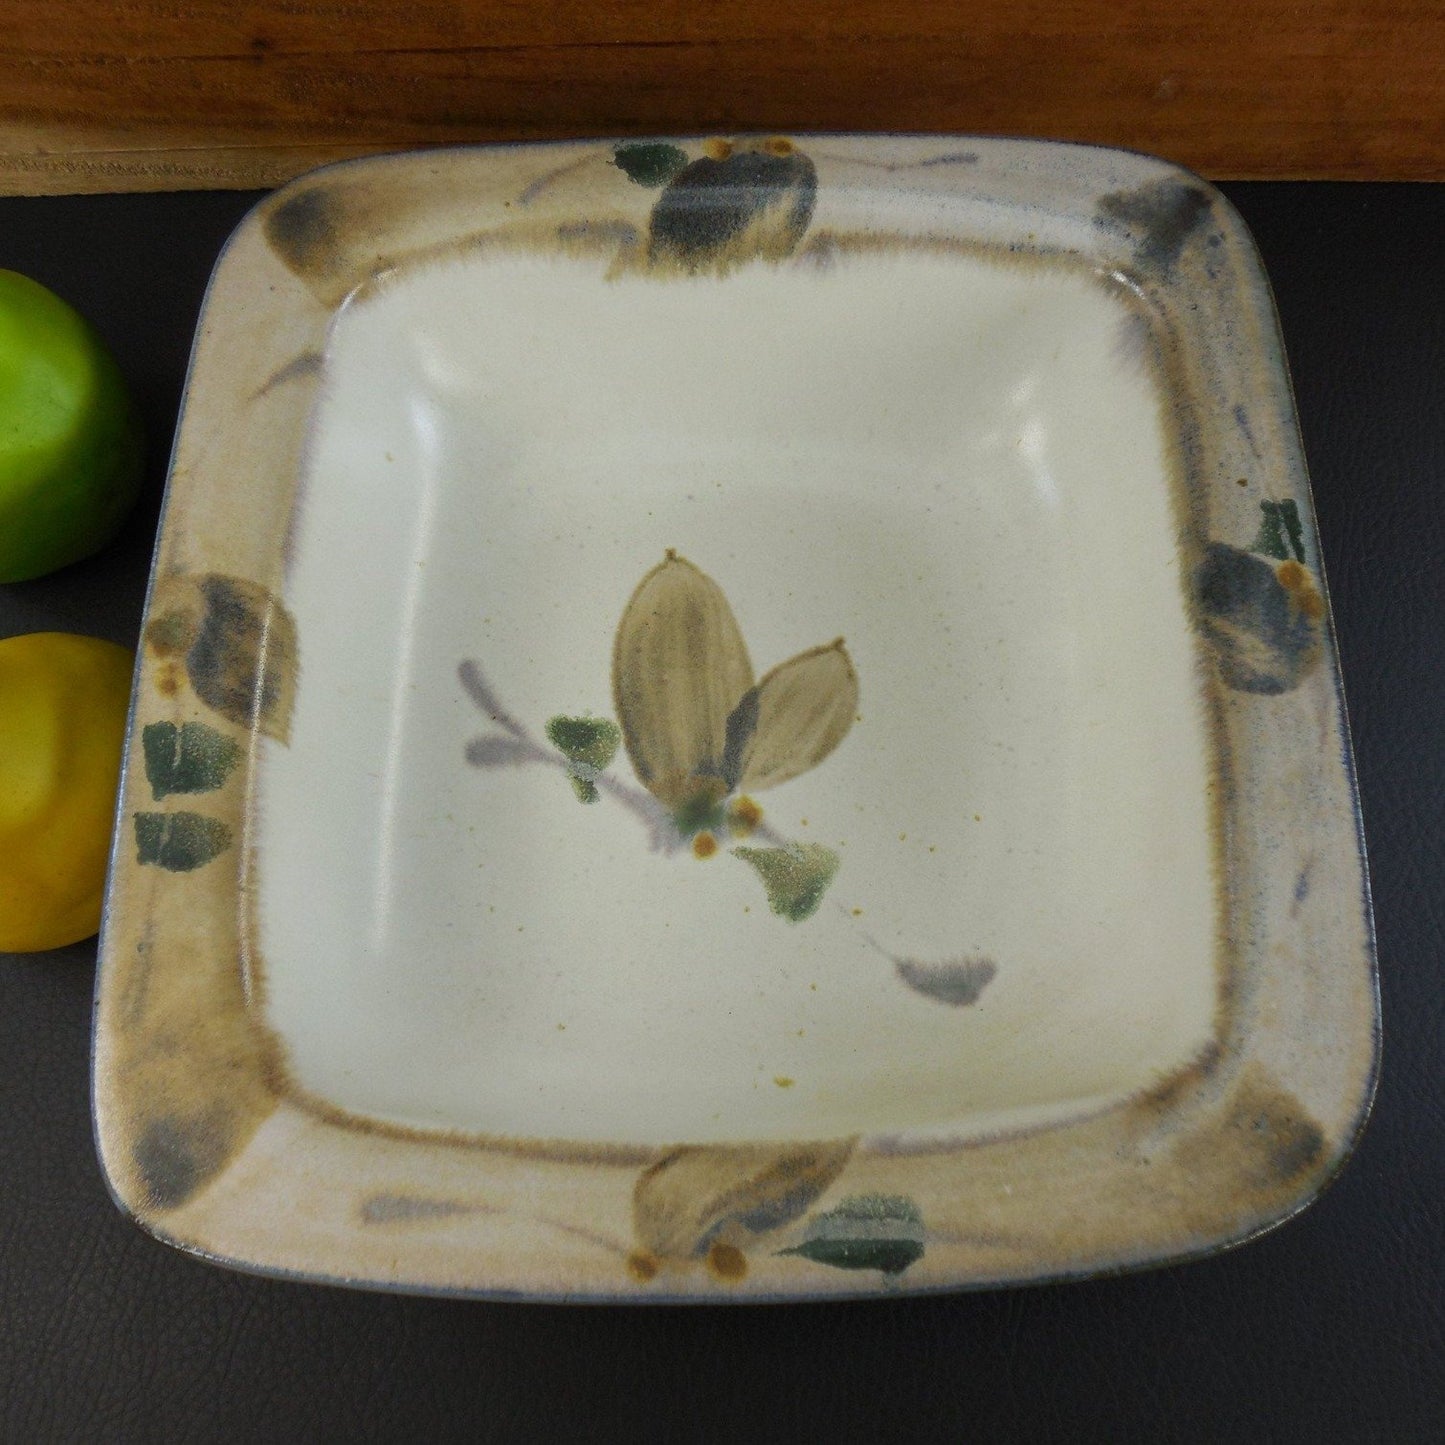 Harriet Hiemstra - Large Serving Harriet Hiemstra BC Canada Large Serving Table Bowl - Art Studio Pottery